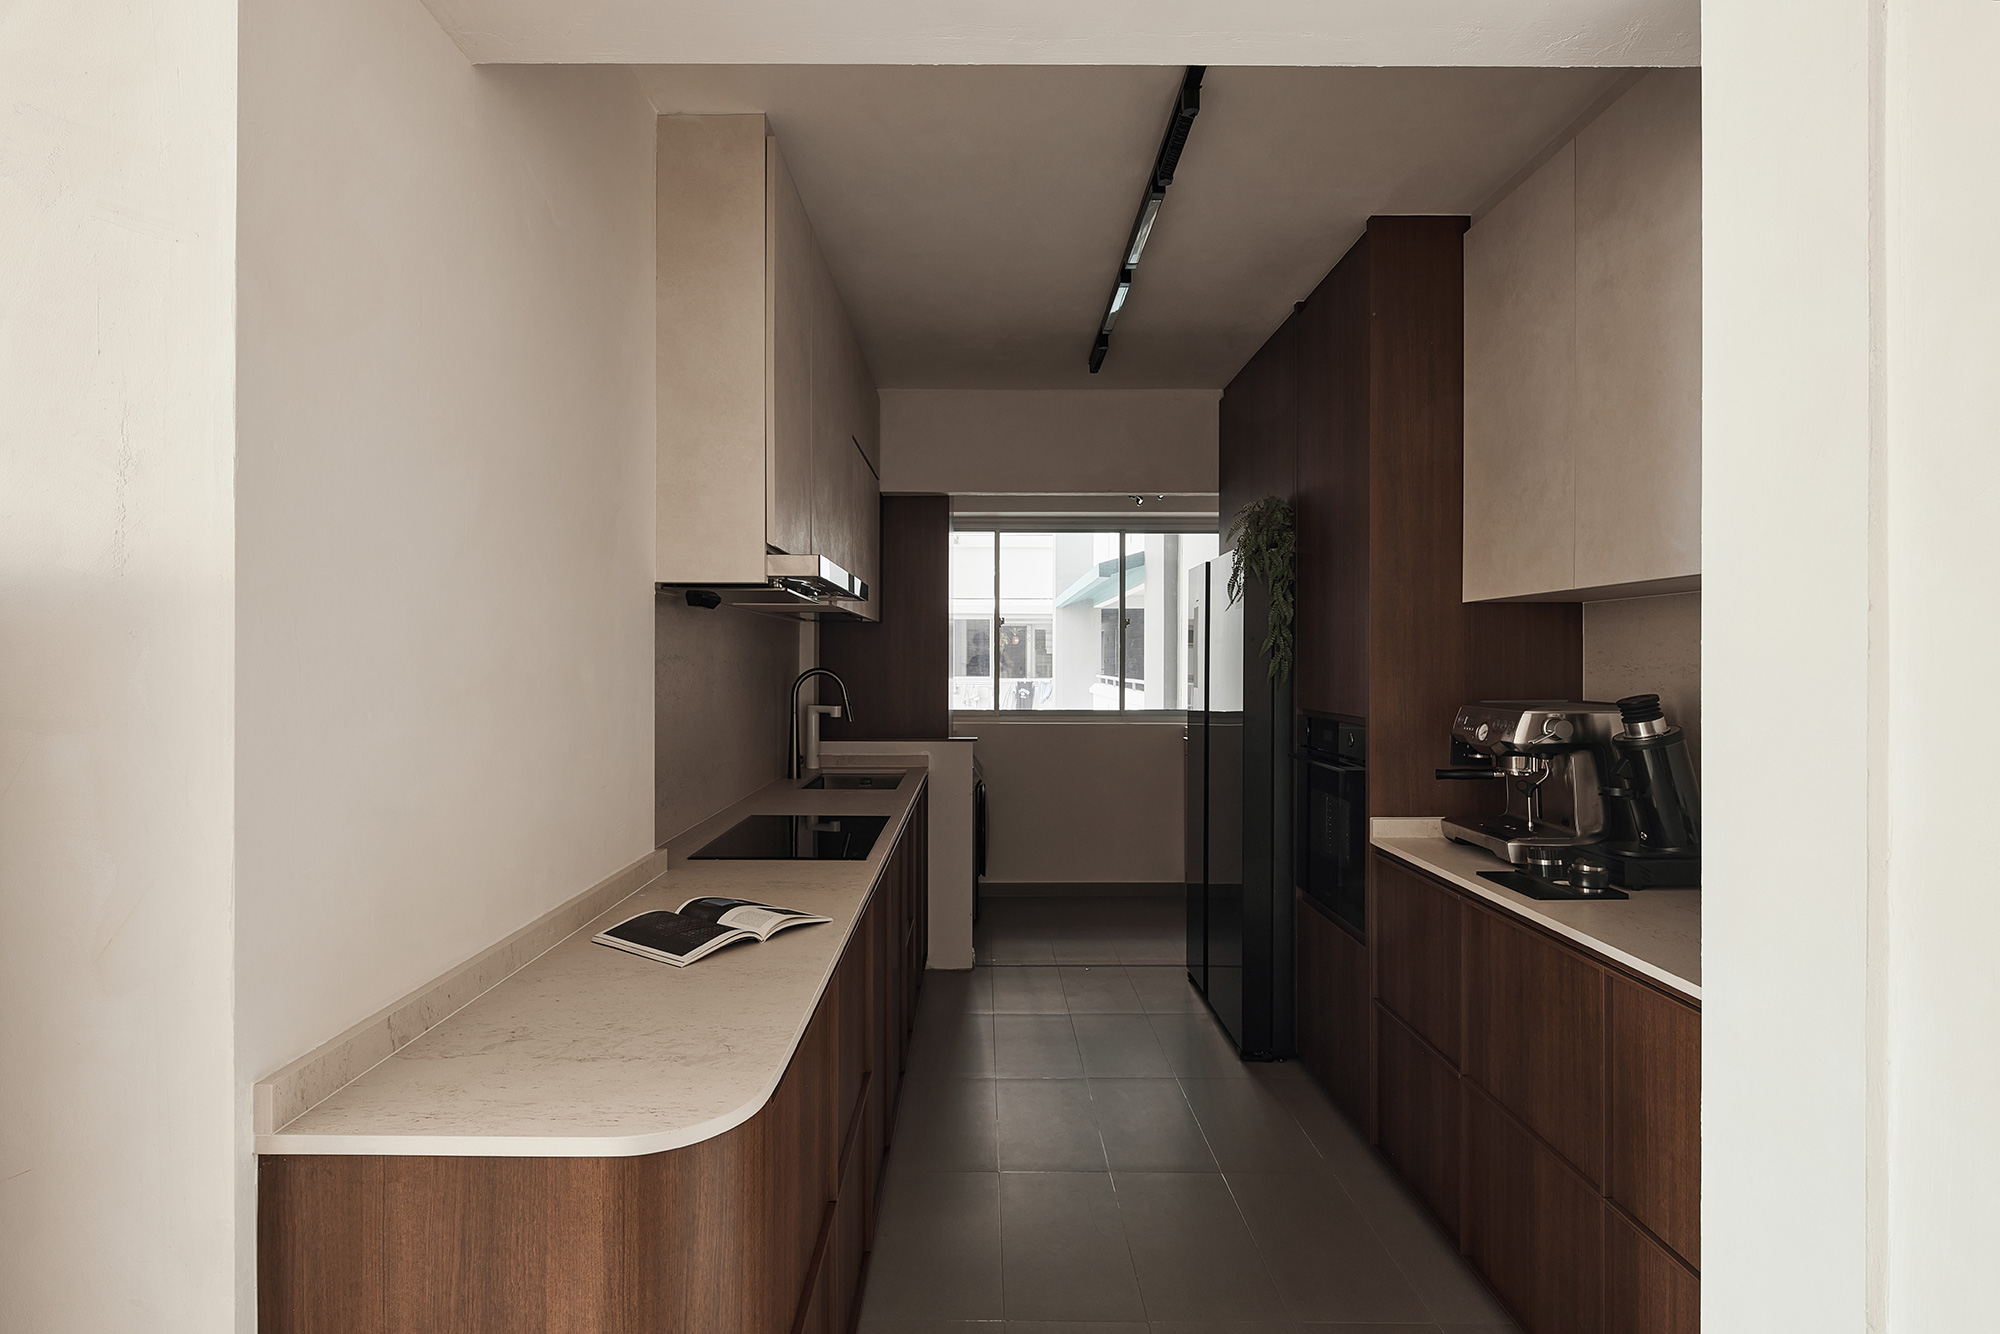 Image of 629A Tampines north dr 2 12 39 15 1 in An Italian-inspired kitchen with a Scandinavian style, where functionality prevails thanks to Dekton - Cosentino